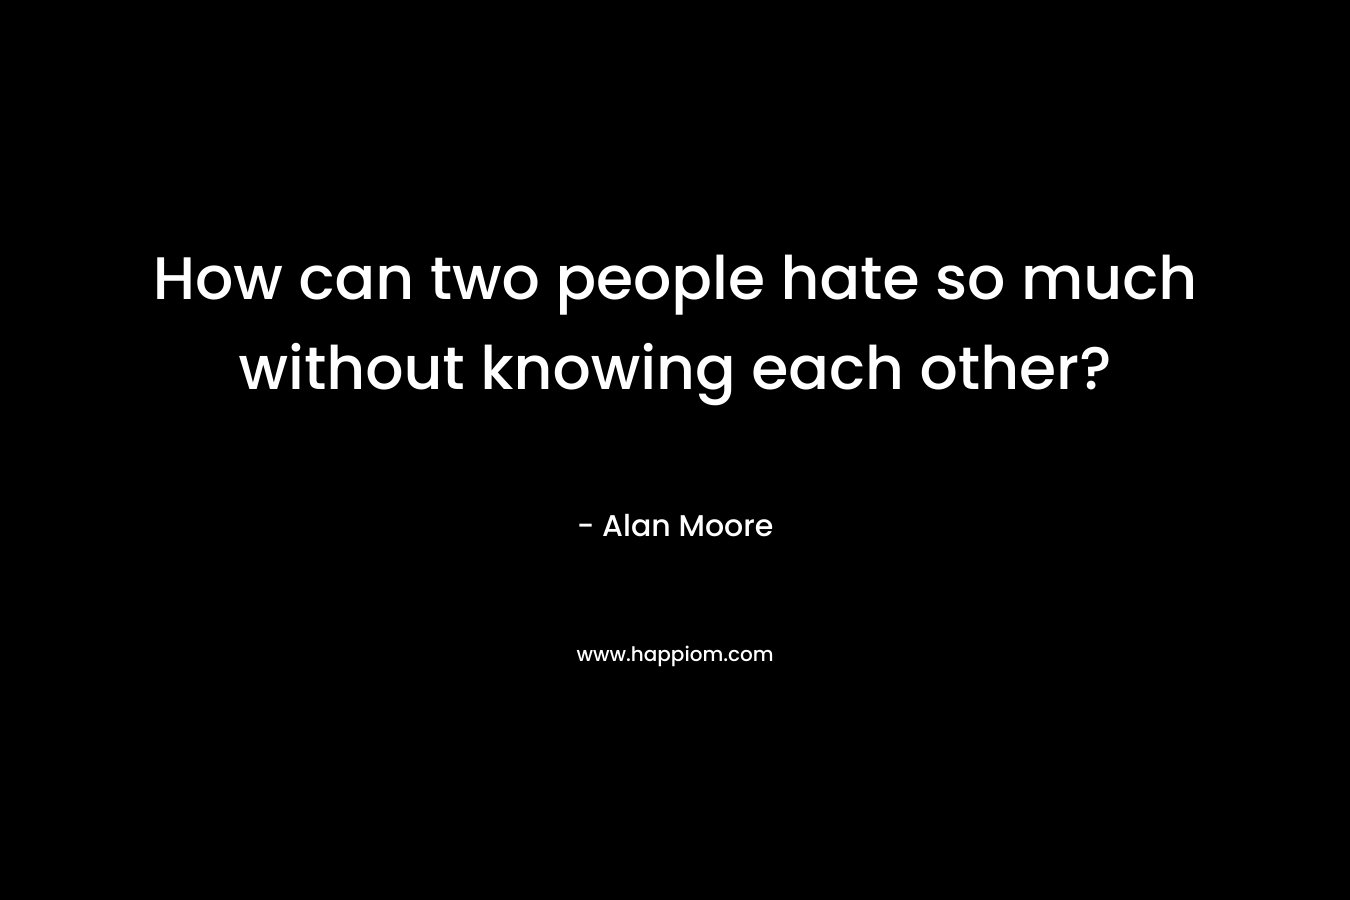 How can two people hate so much without knowing each other? – Alan Moore